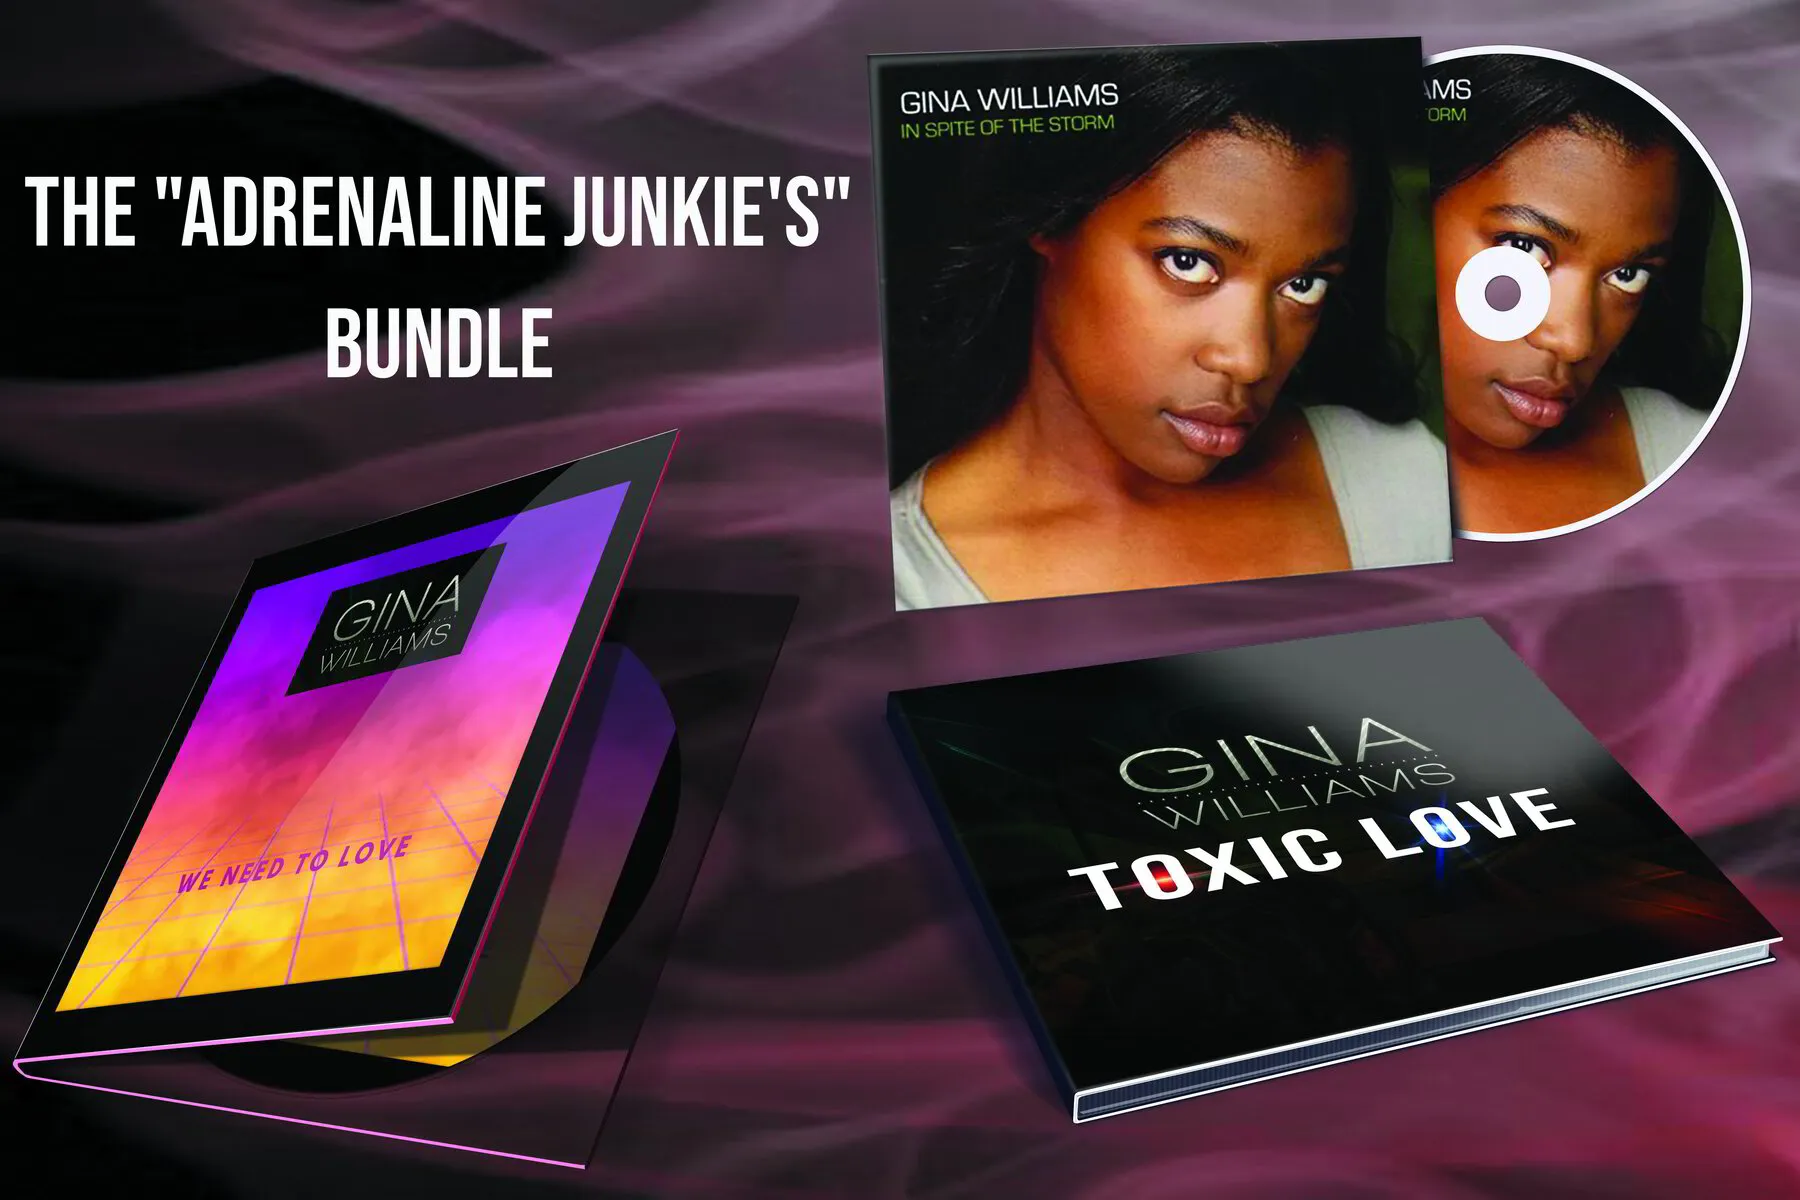 The "Adrenaline Junkie's" Physical Bundle